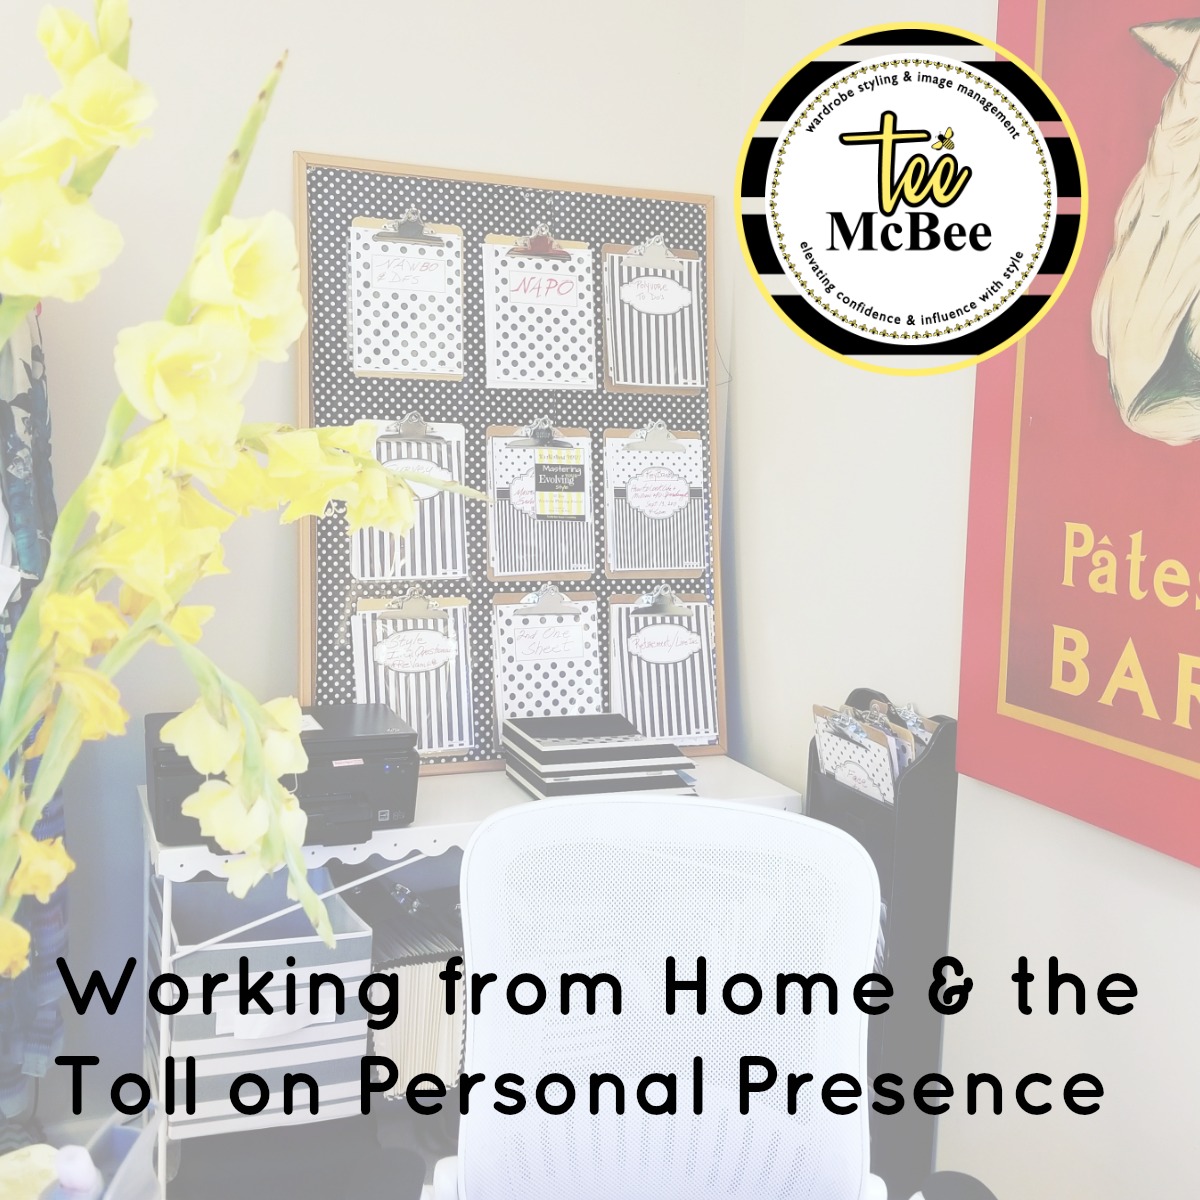 Working from Home & the Toll on Personal Presence